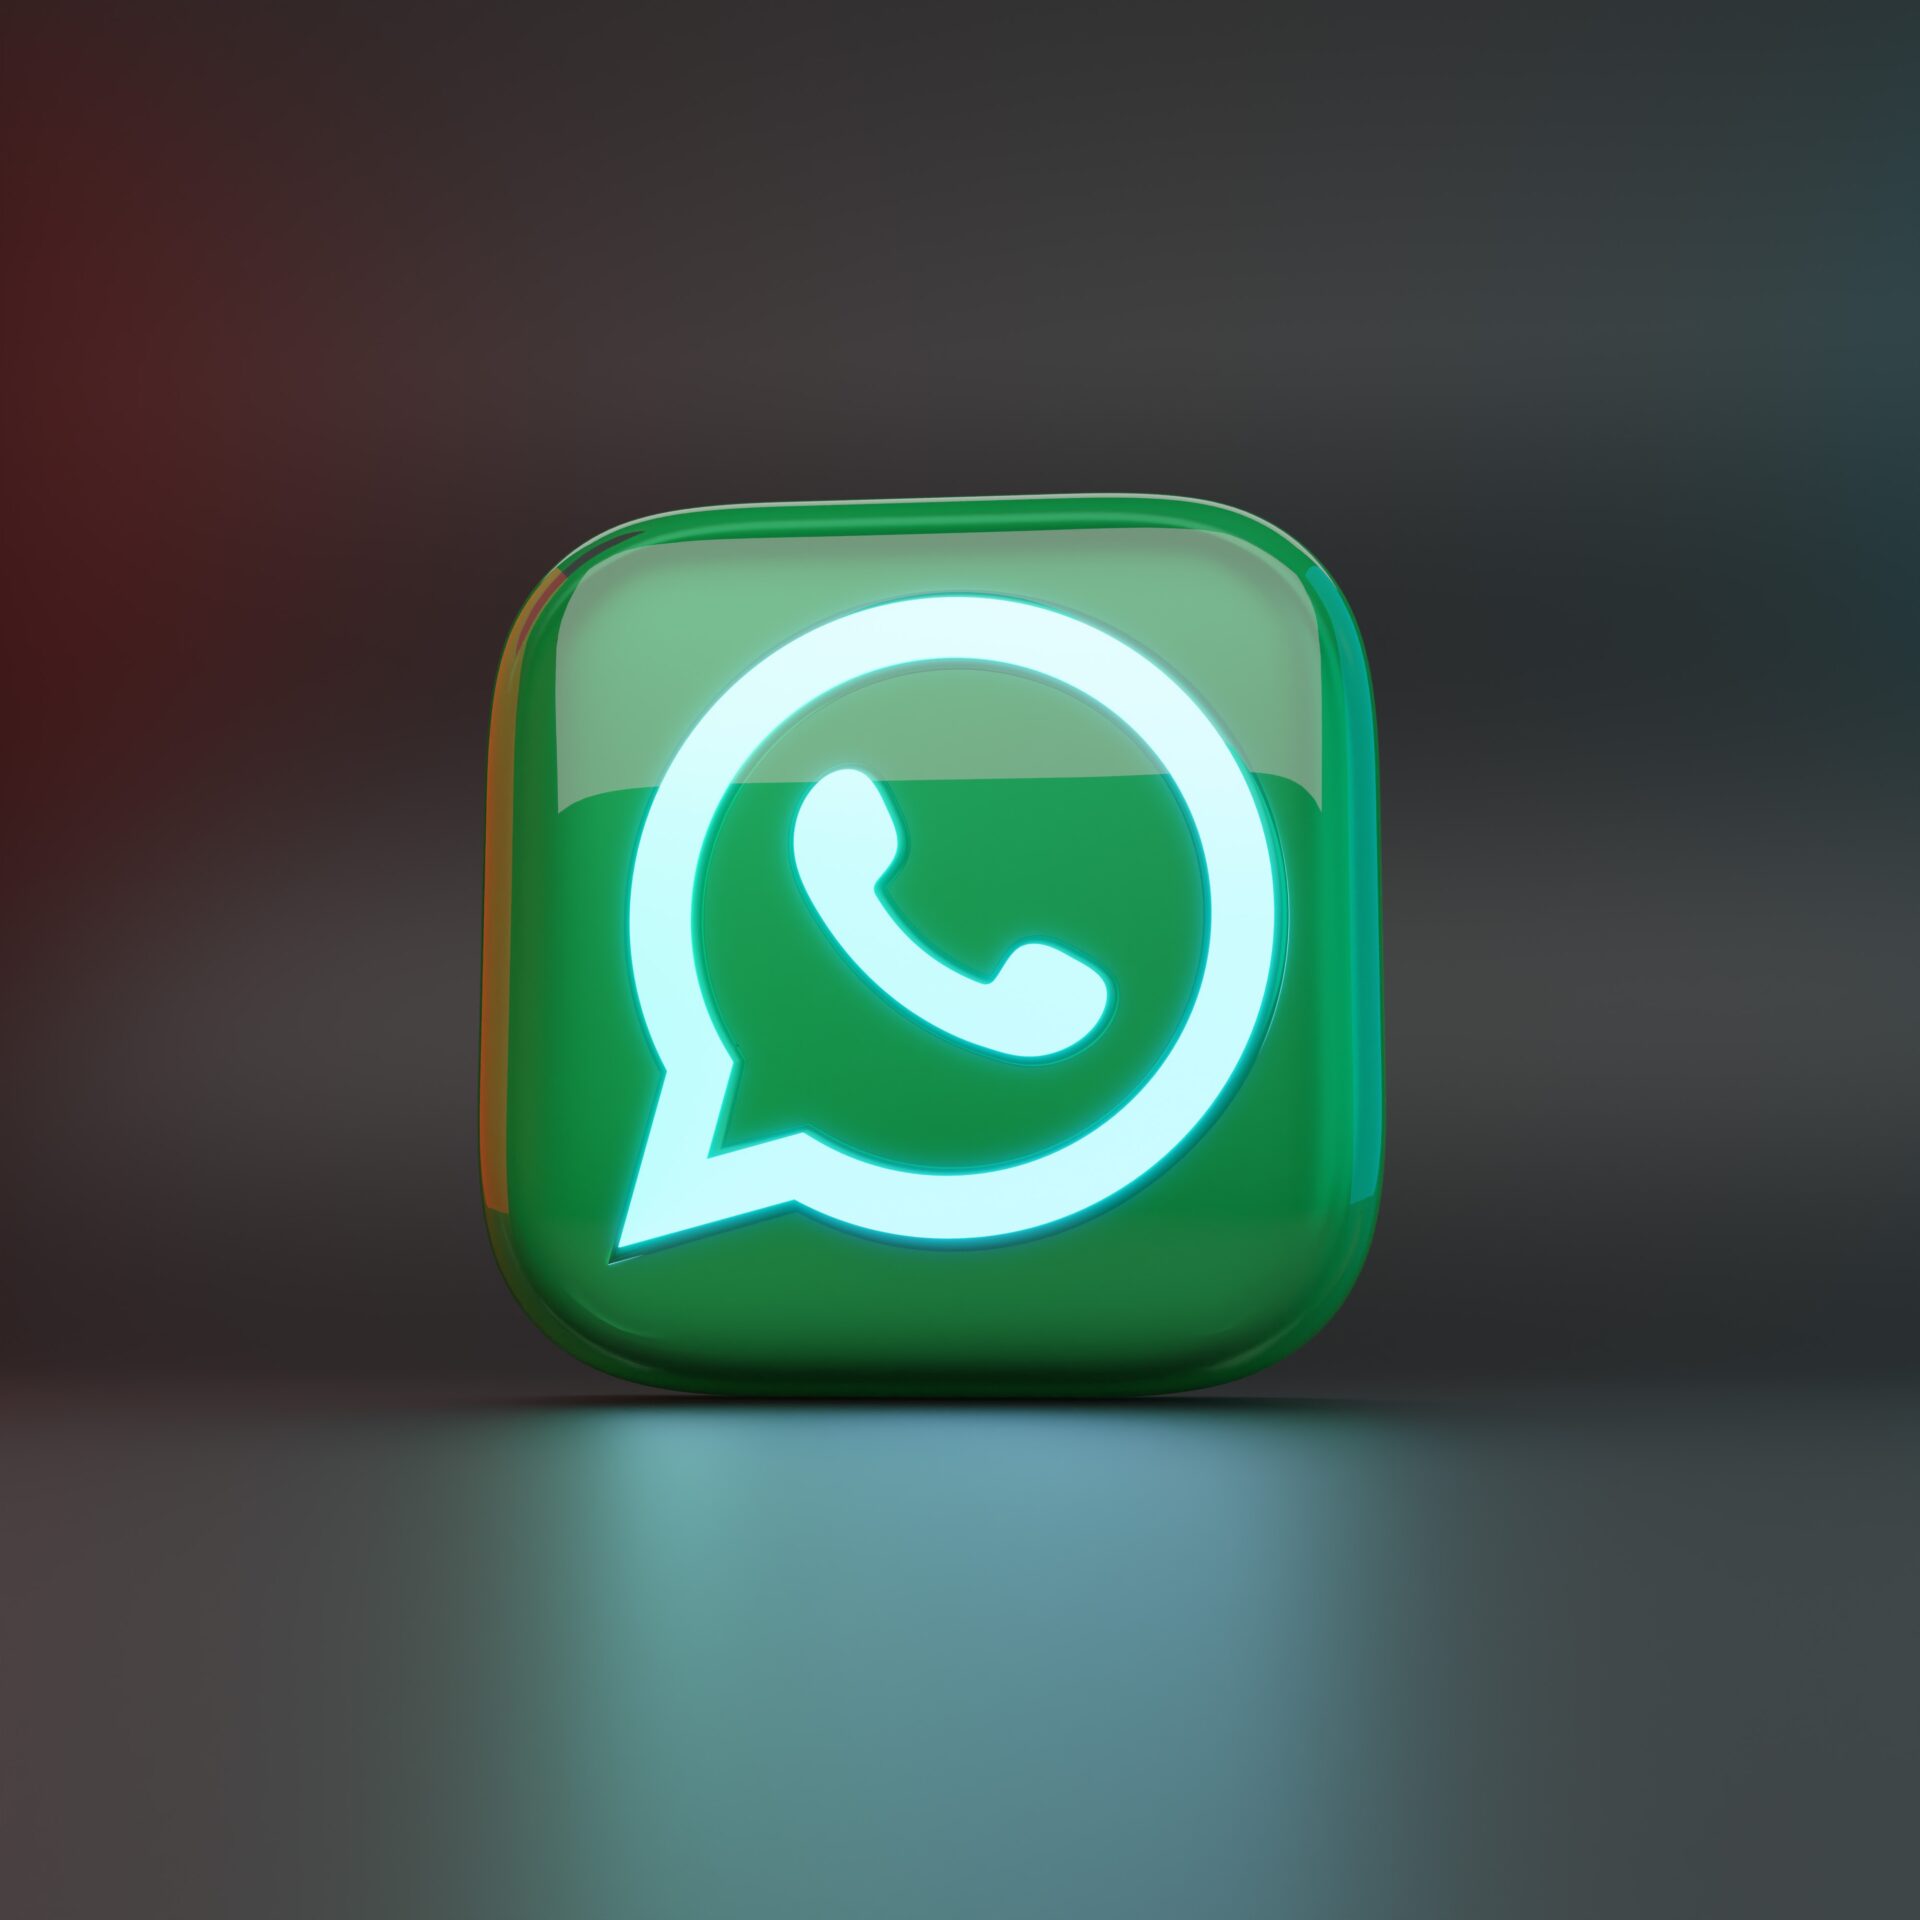 How to use WhatsApp’s screen sharing, video message features